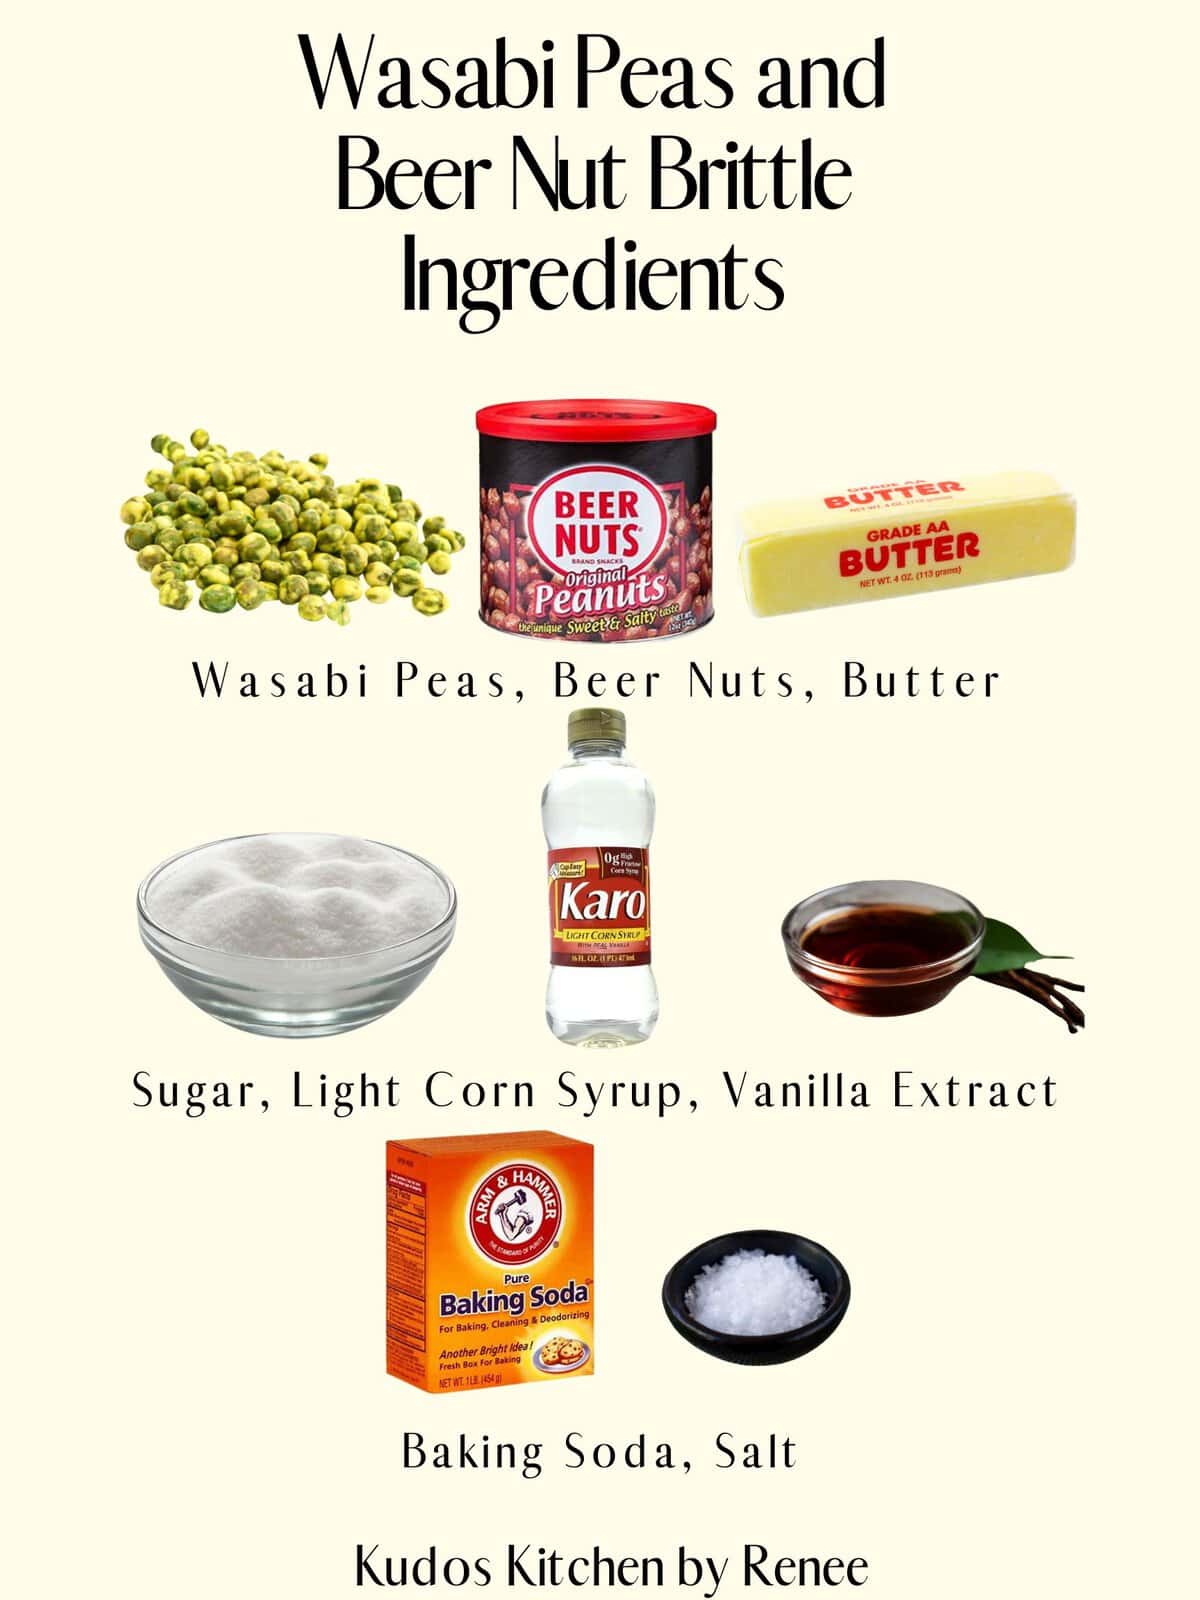 A visual ingredient list for making Wasabi Pea and Beer Nut Brittle.